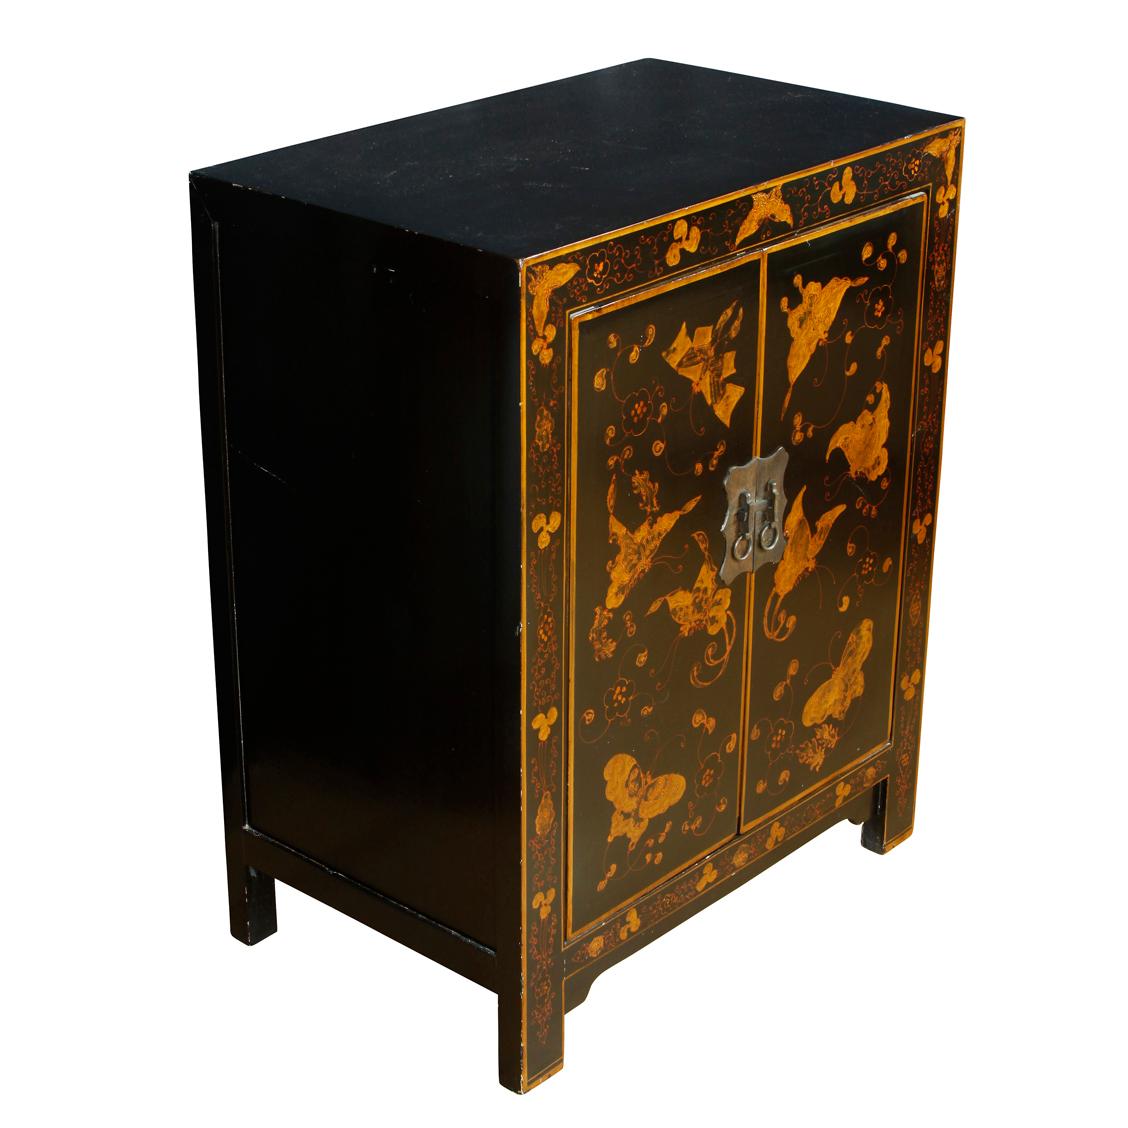 A small storage cabinet painted black with chinoiserie decoration on doors. The piece is a nice size, and can be used as a side table or nightstand. The doors open to reveal and inner storage area with one shelf.